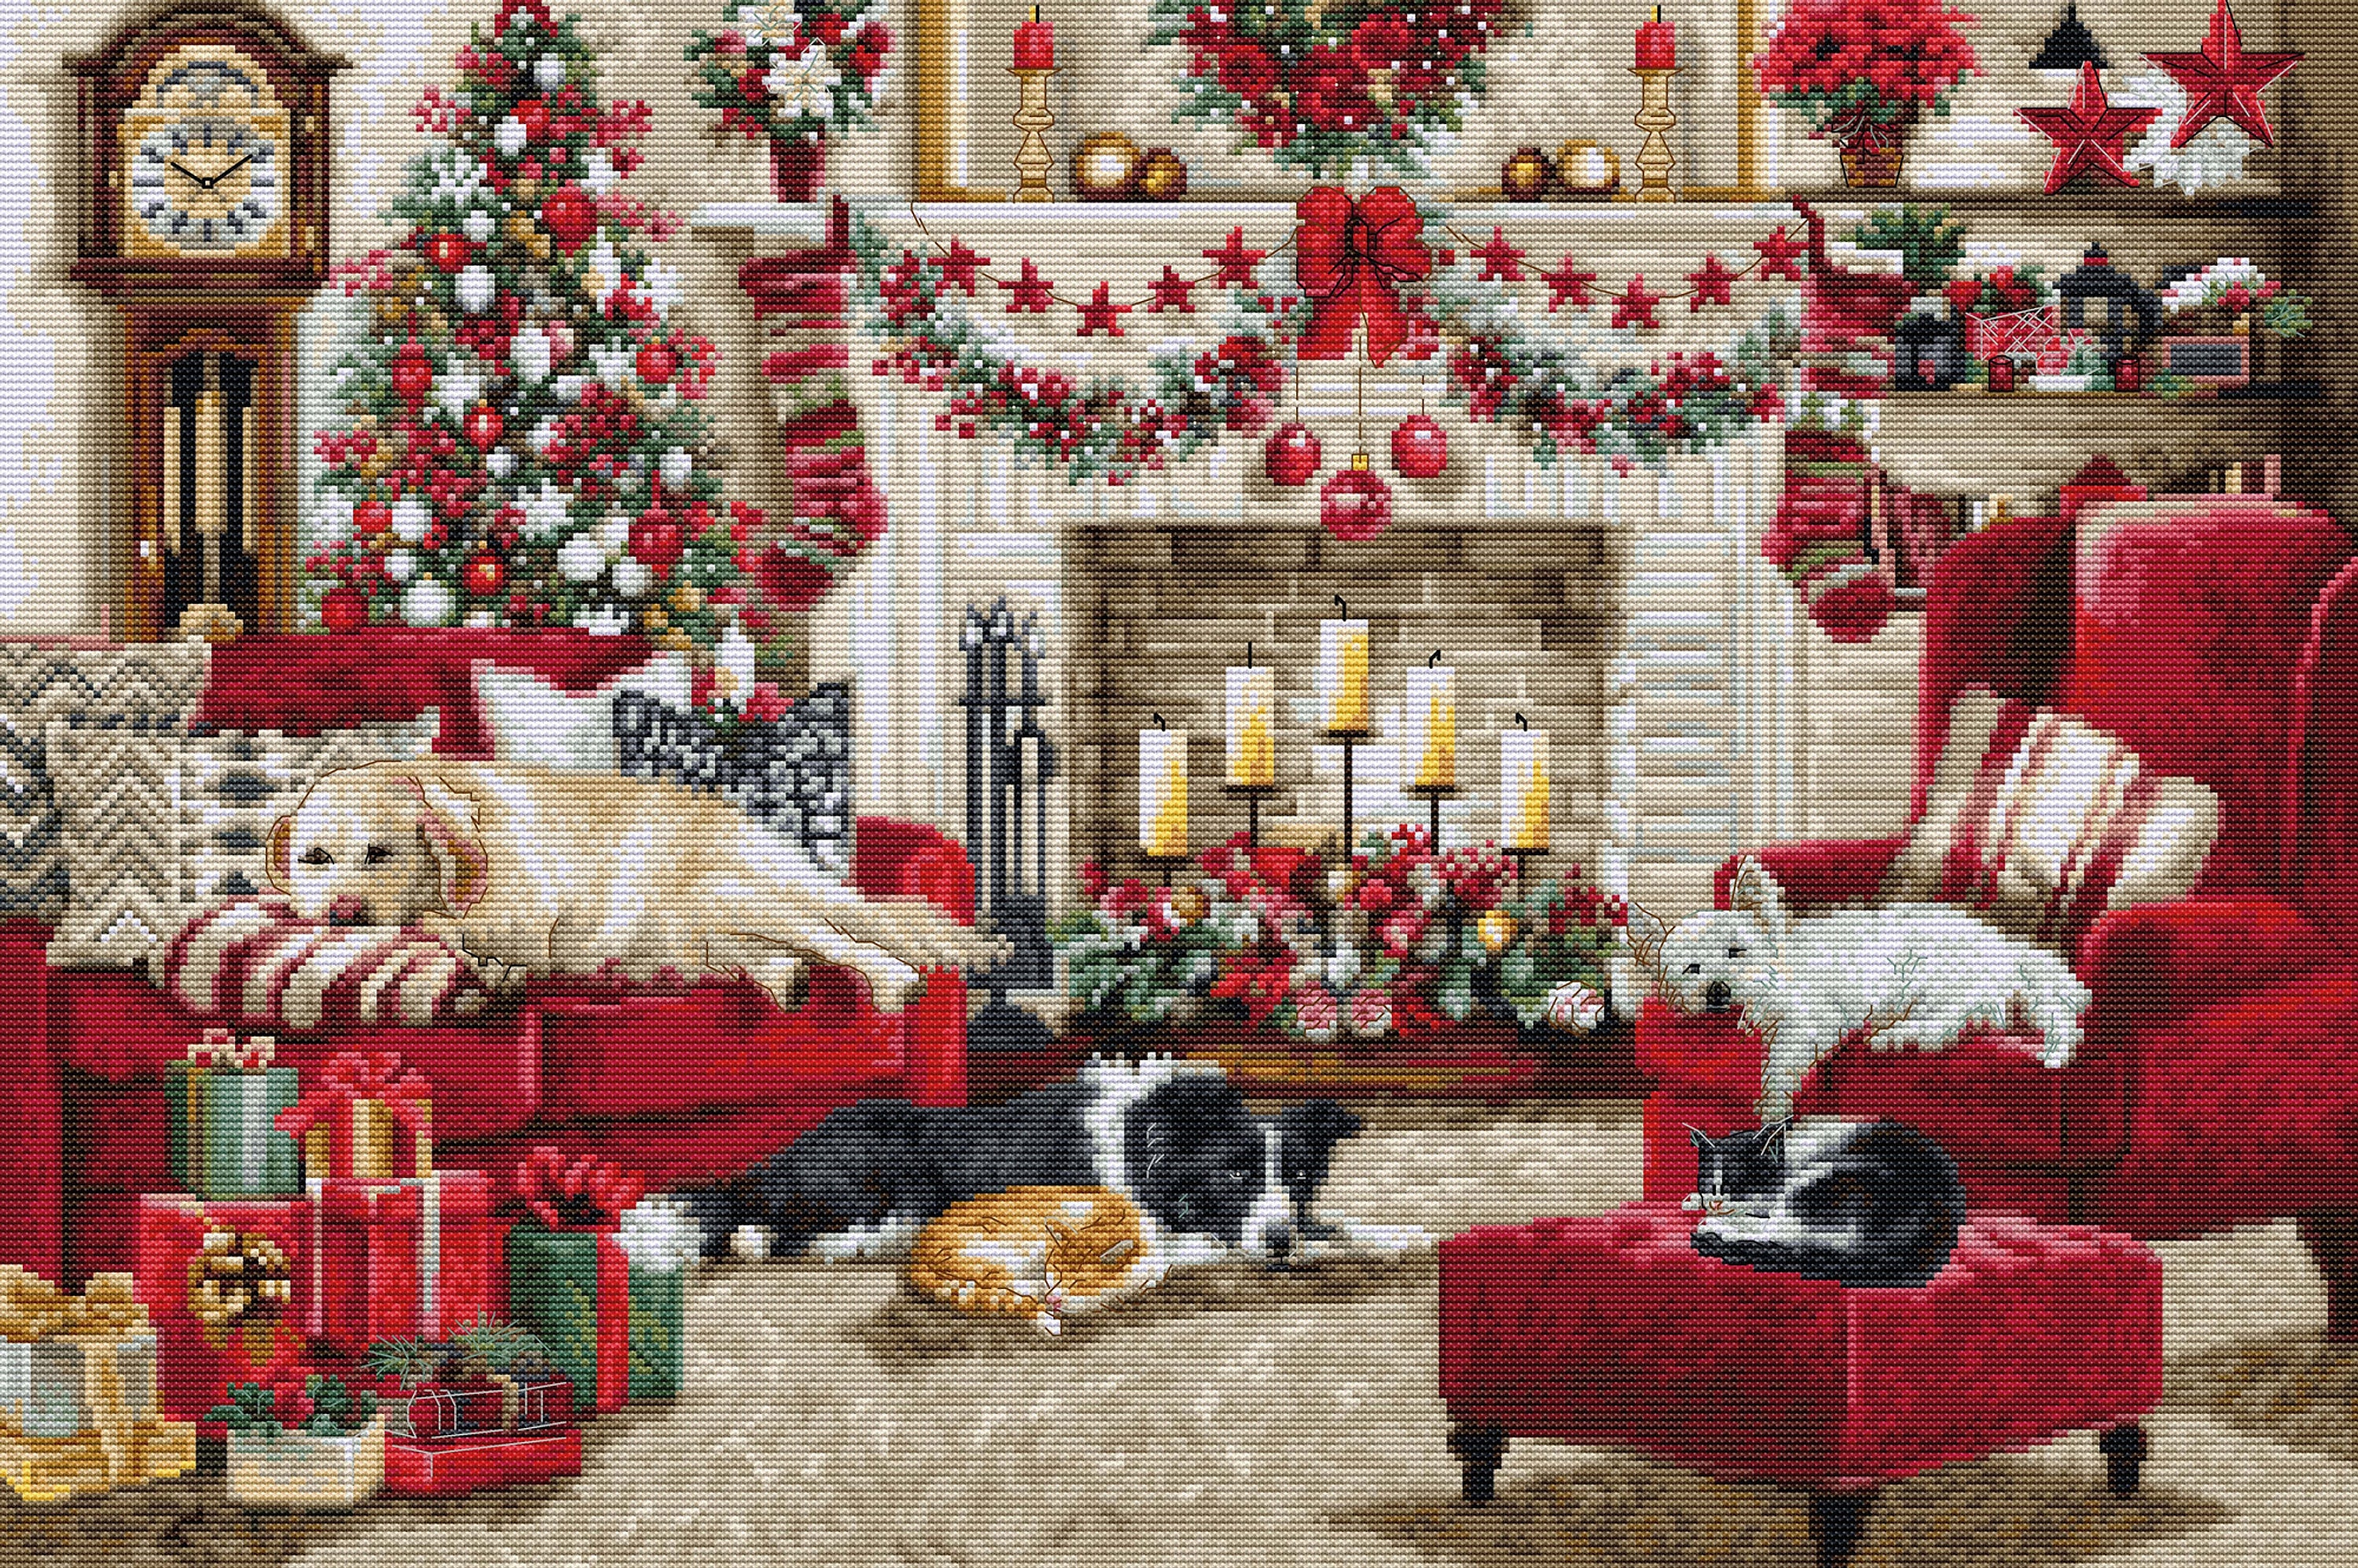 Luca-S Puppies Christmas Kit & Frame Counted Cross-Stitch